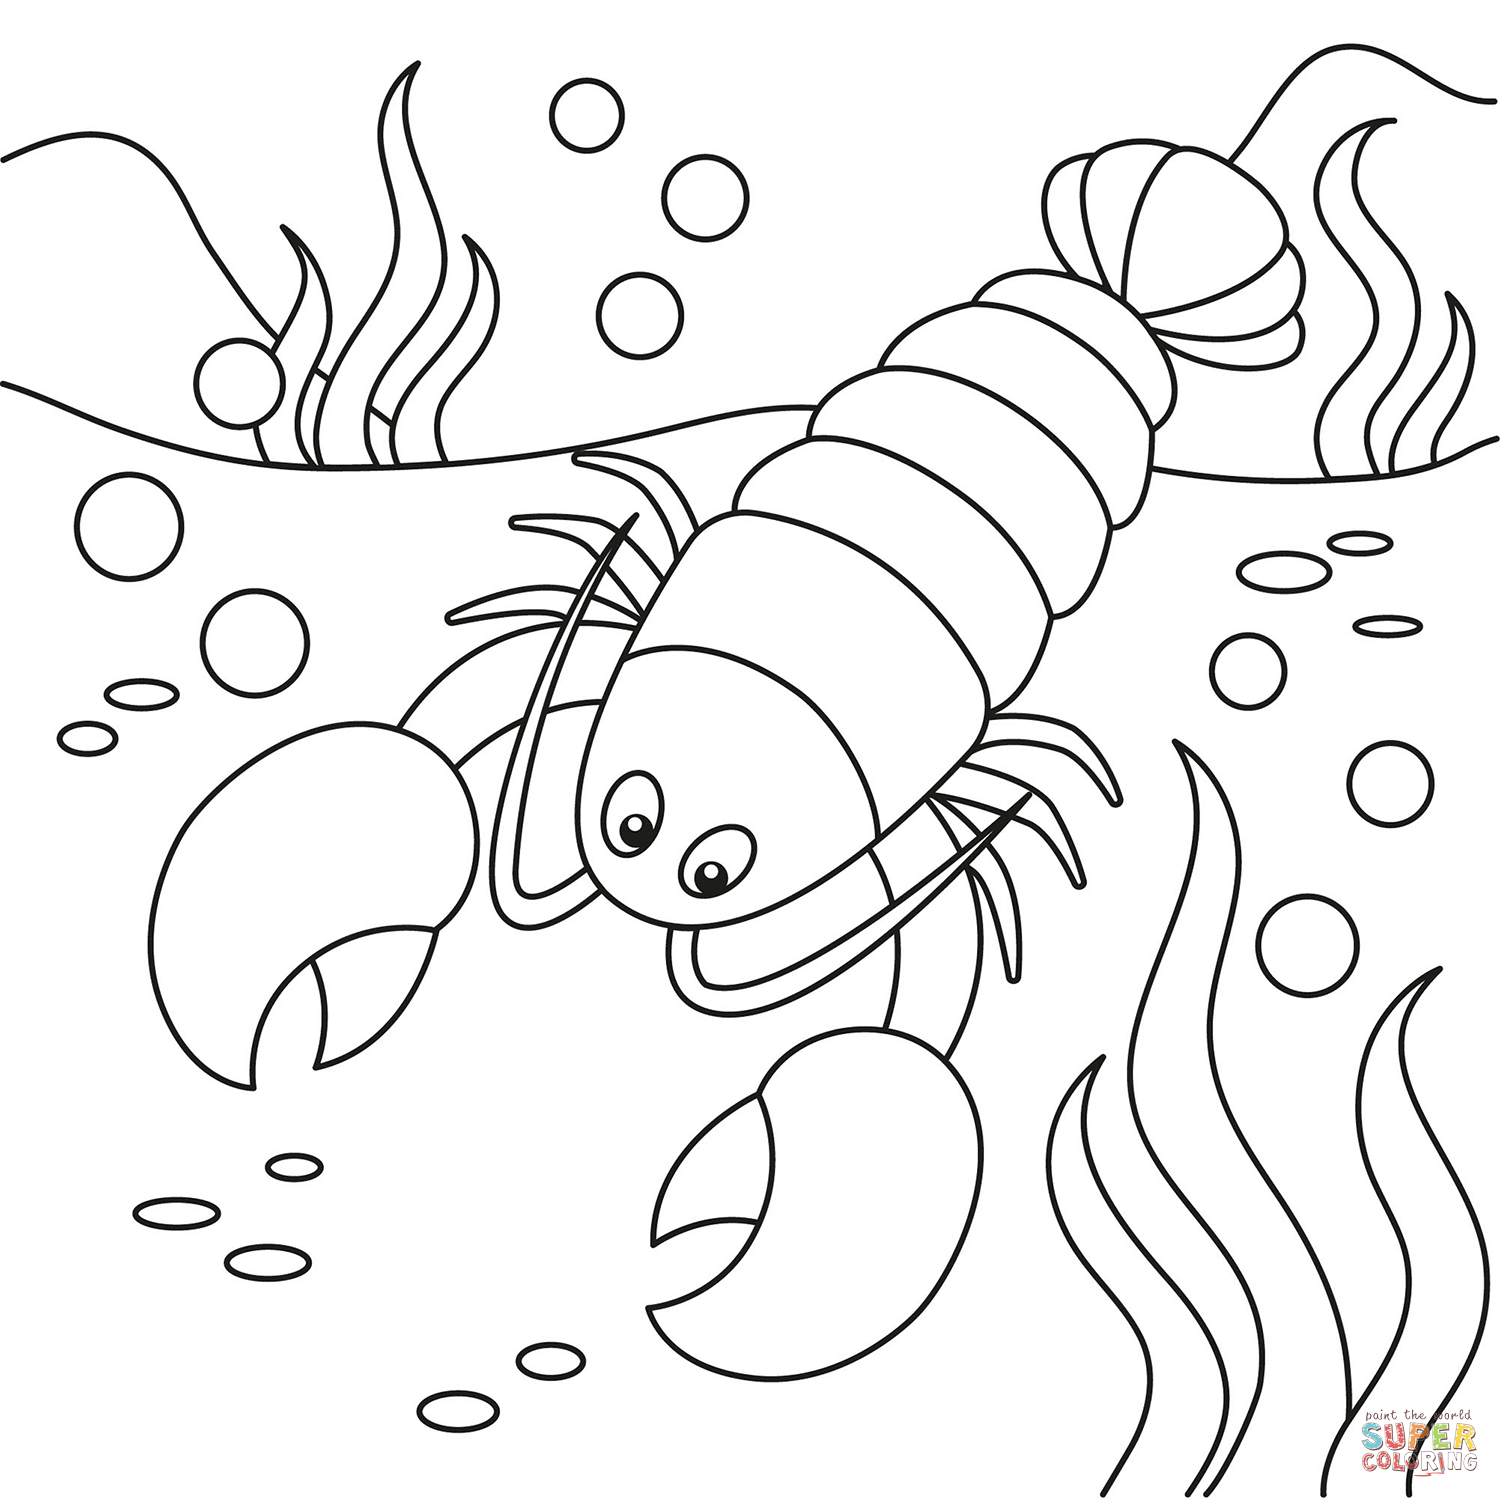 Cartoon lobster coloring page free printable coloring pages